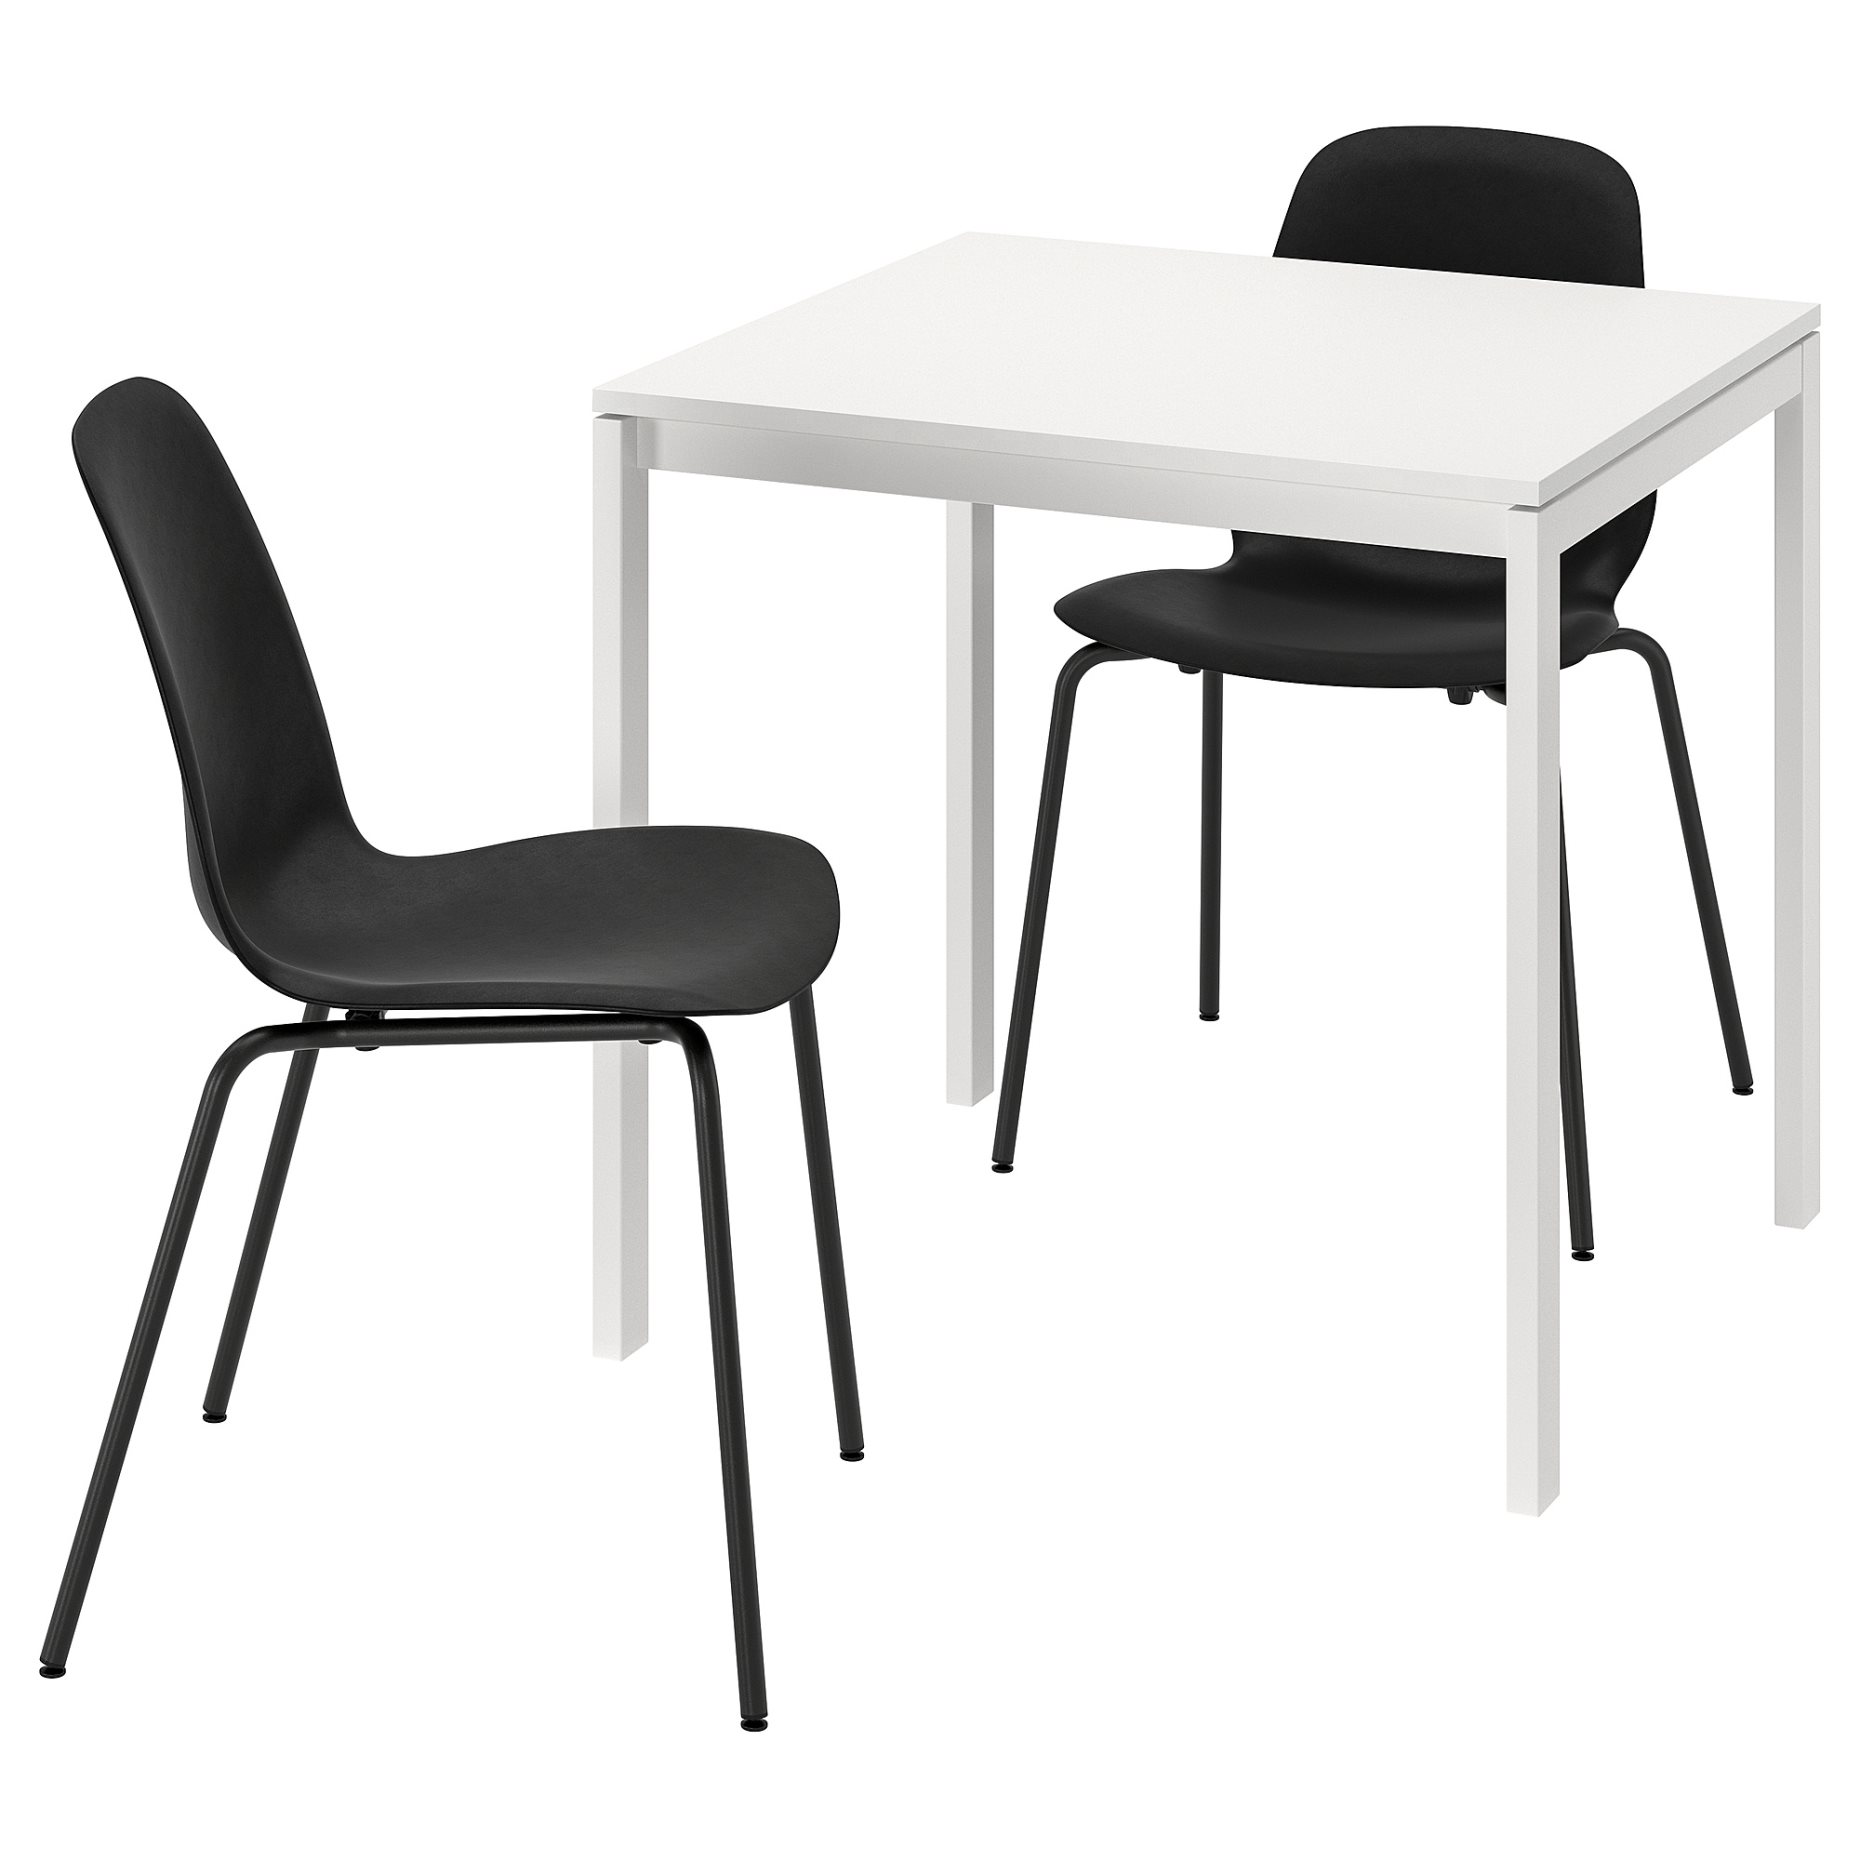 MELLTORP/LIDAS, table and 2 chairs, 75x75 cm, 295.090.45